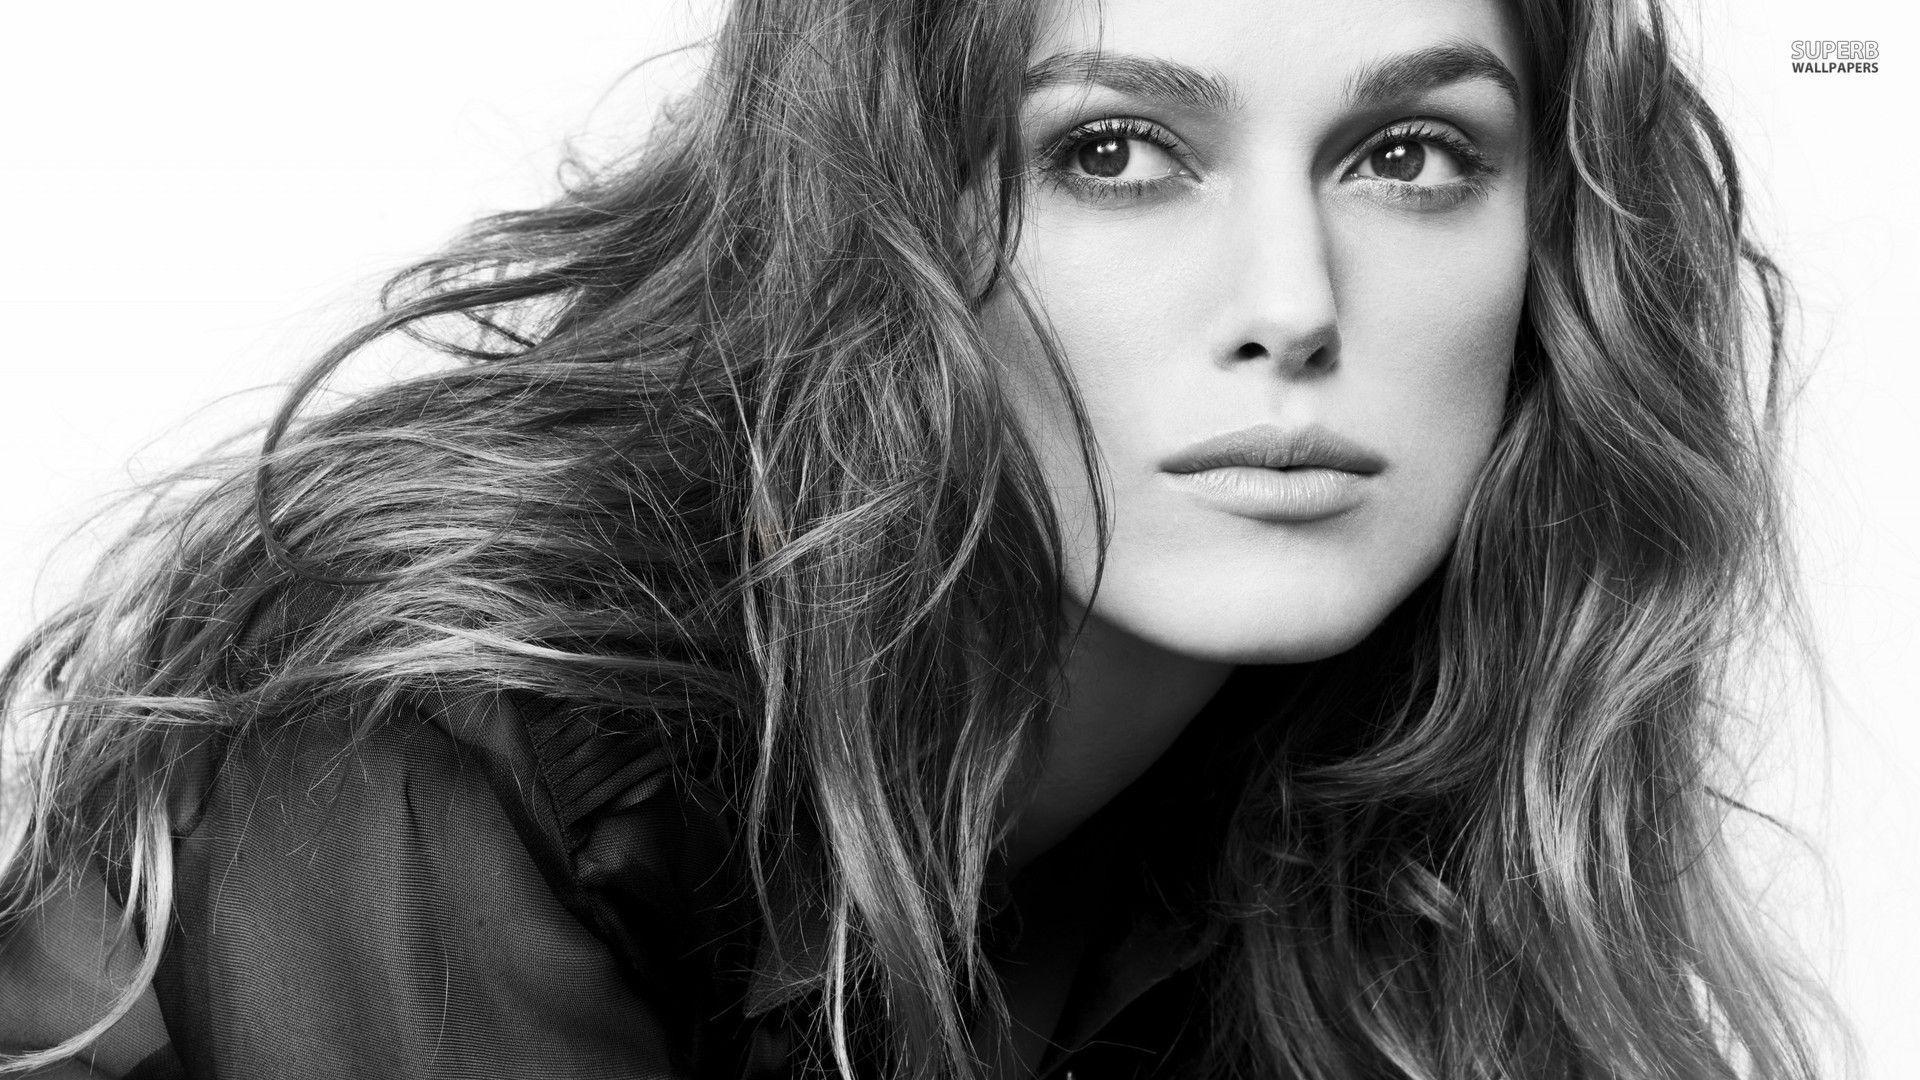 Keira Knightley Full Top Wallpapers In Hd Free Download Sexy  फट शयर